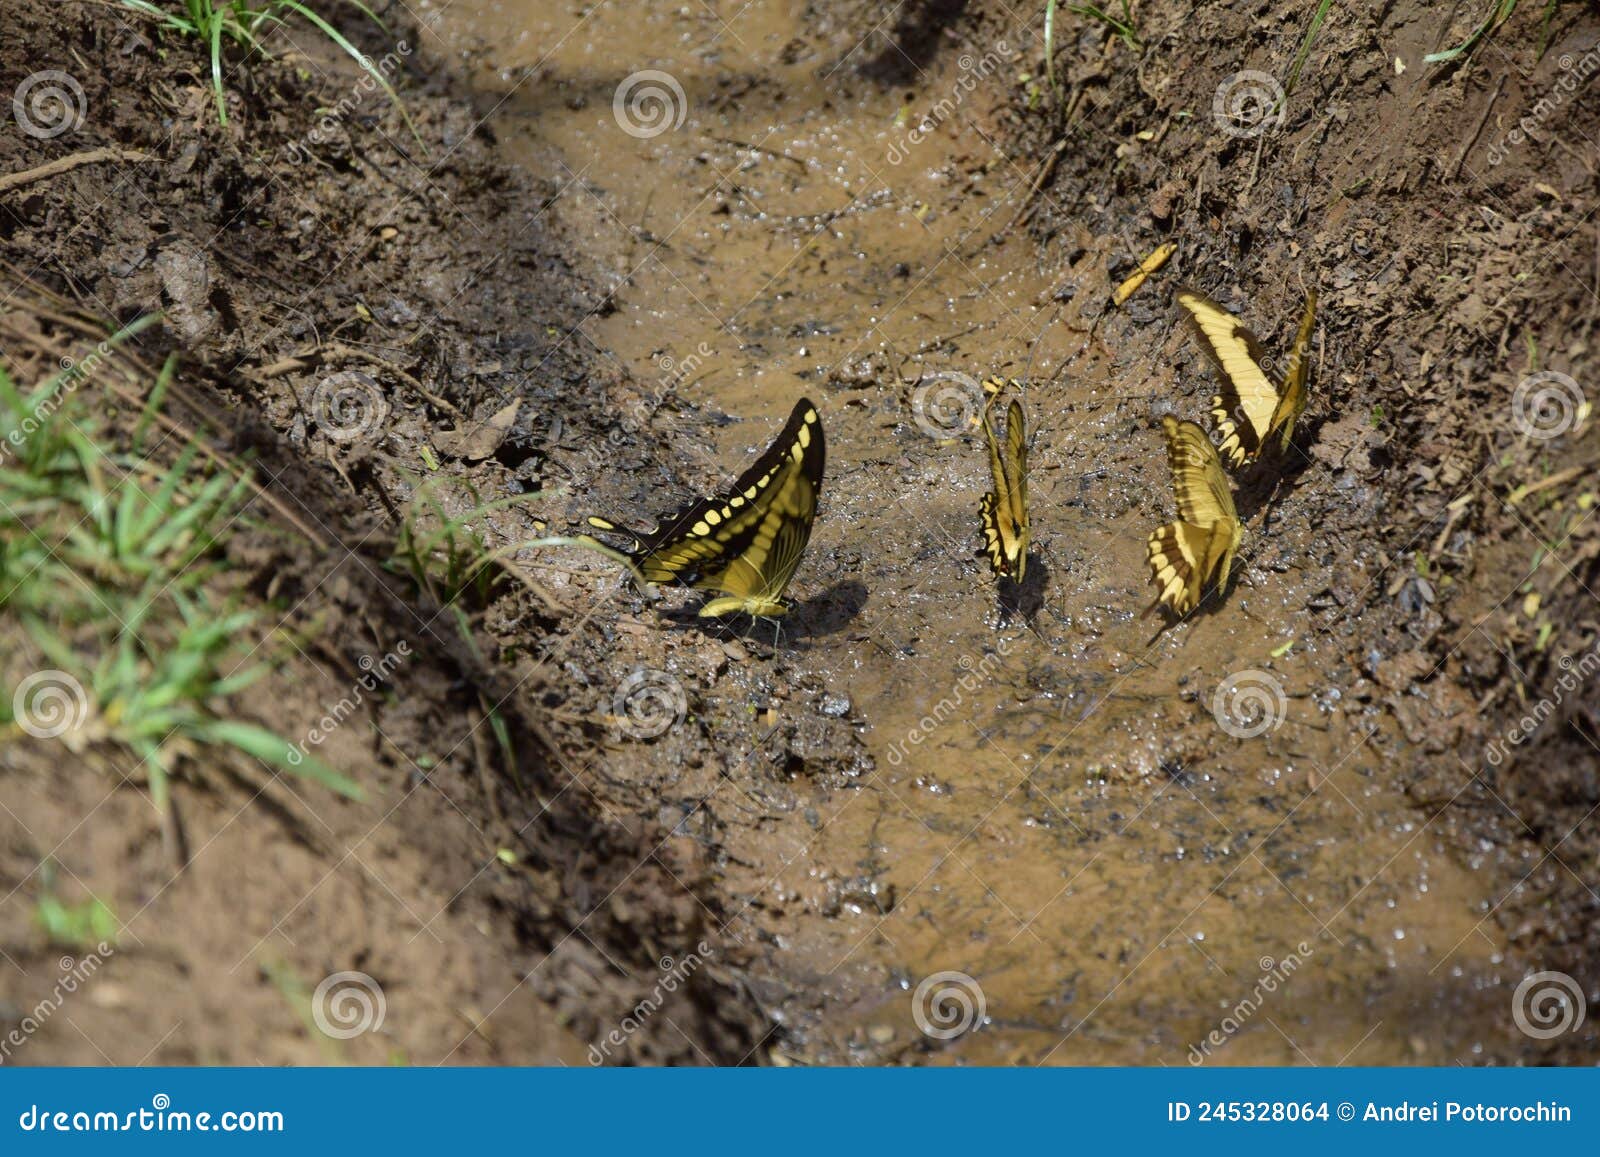 yellow butterflies drink water from a puddle on the ground. puerto iguazu, argentina